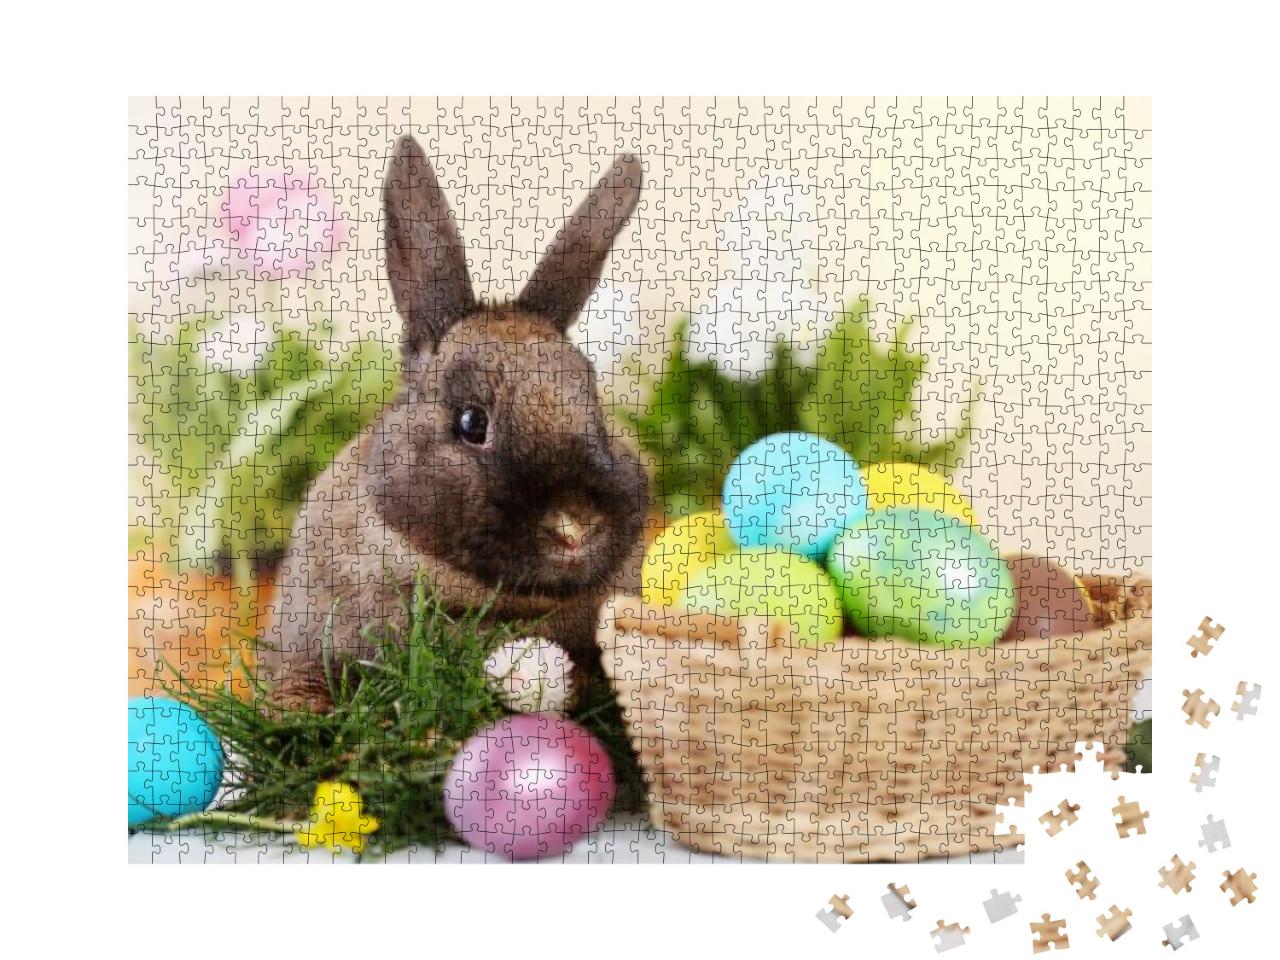 Easter Bunny & Easter Eggs on Green Grass... Jigsaw Puzzle with 1000 pieces